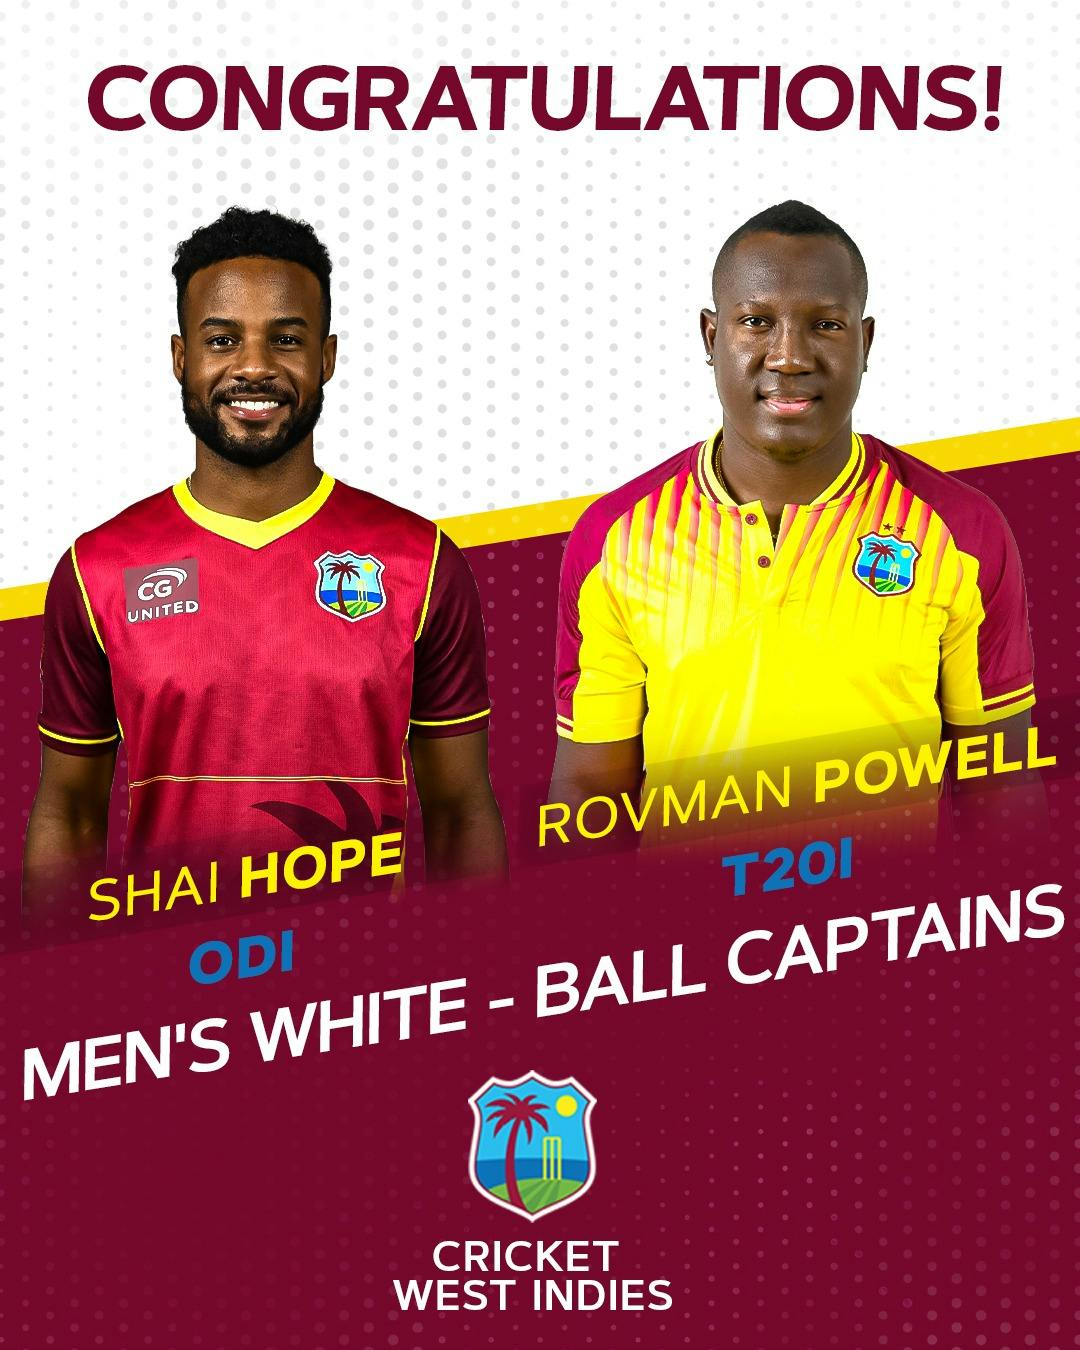 Shai Hope and Rovman Powell named new West Indies whiteball captains - will anything change?